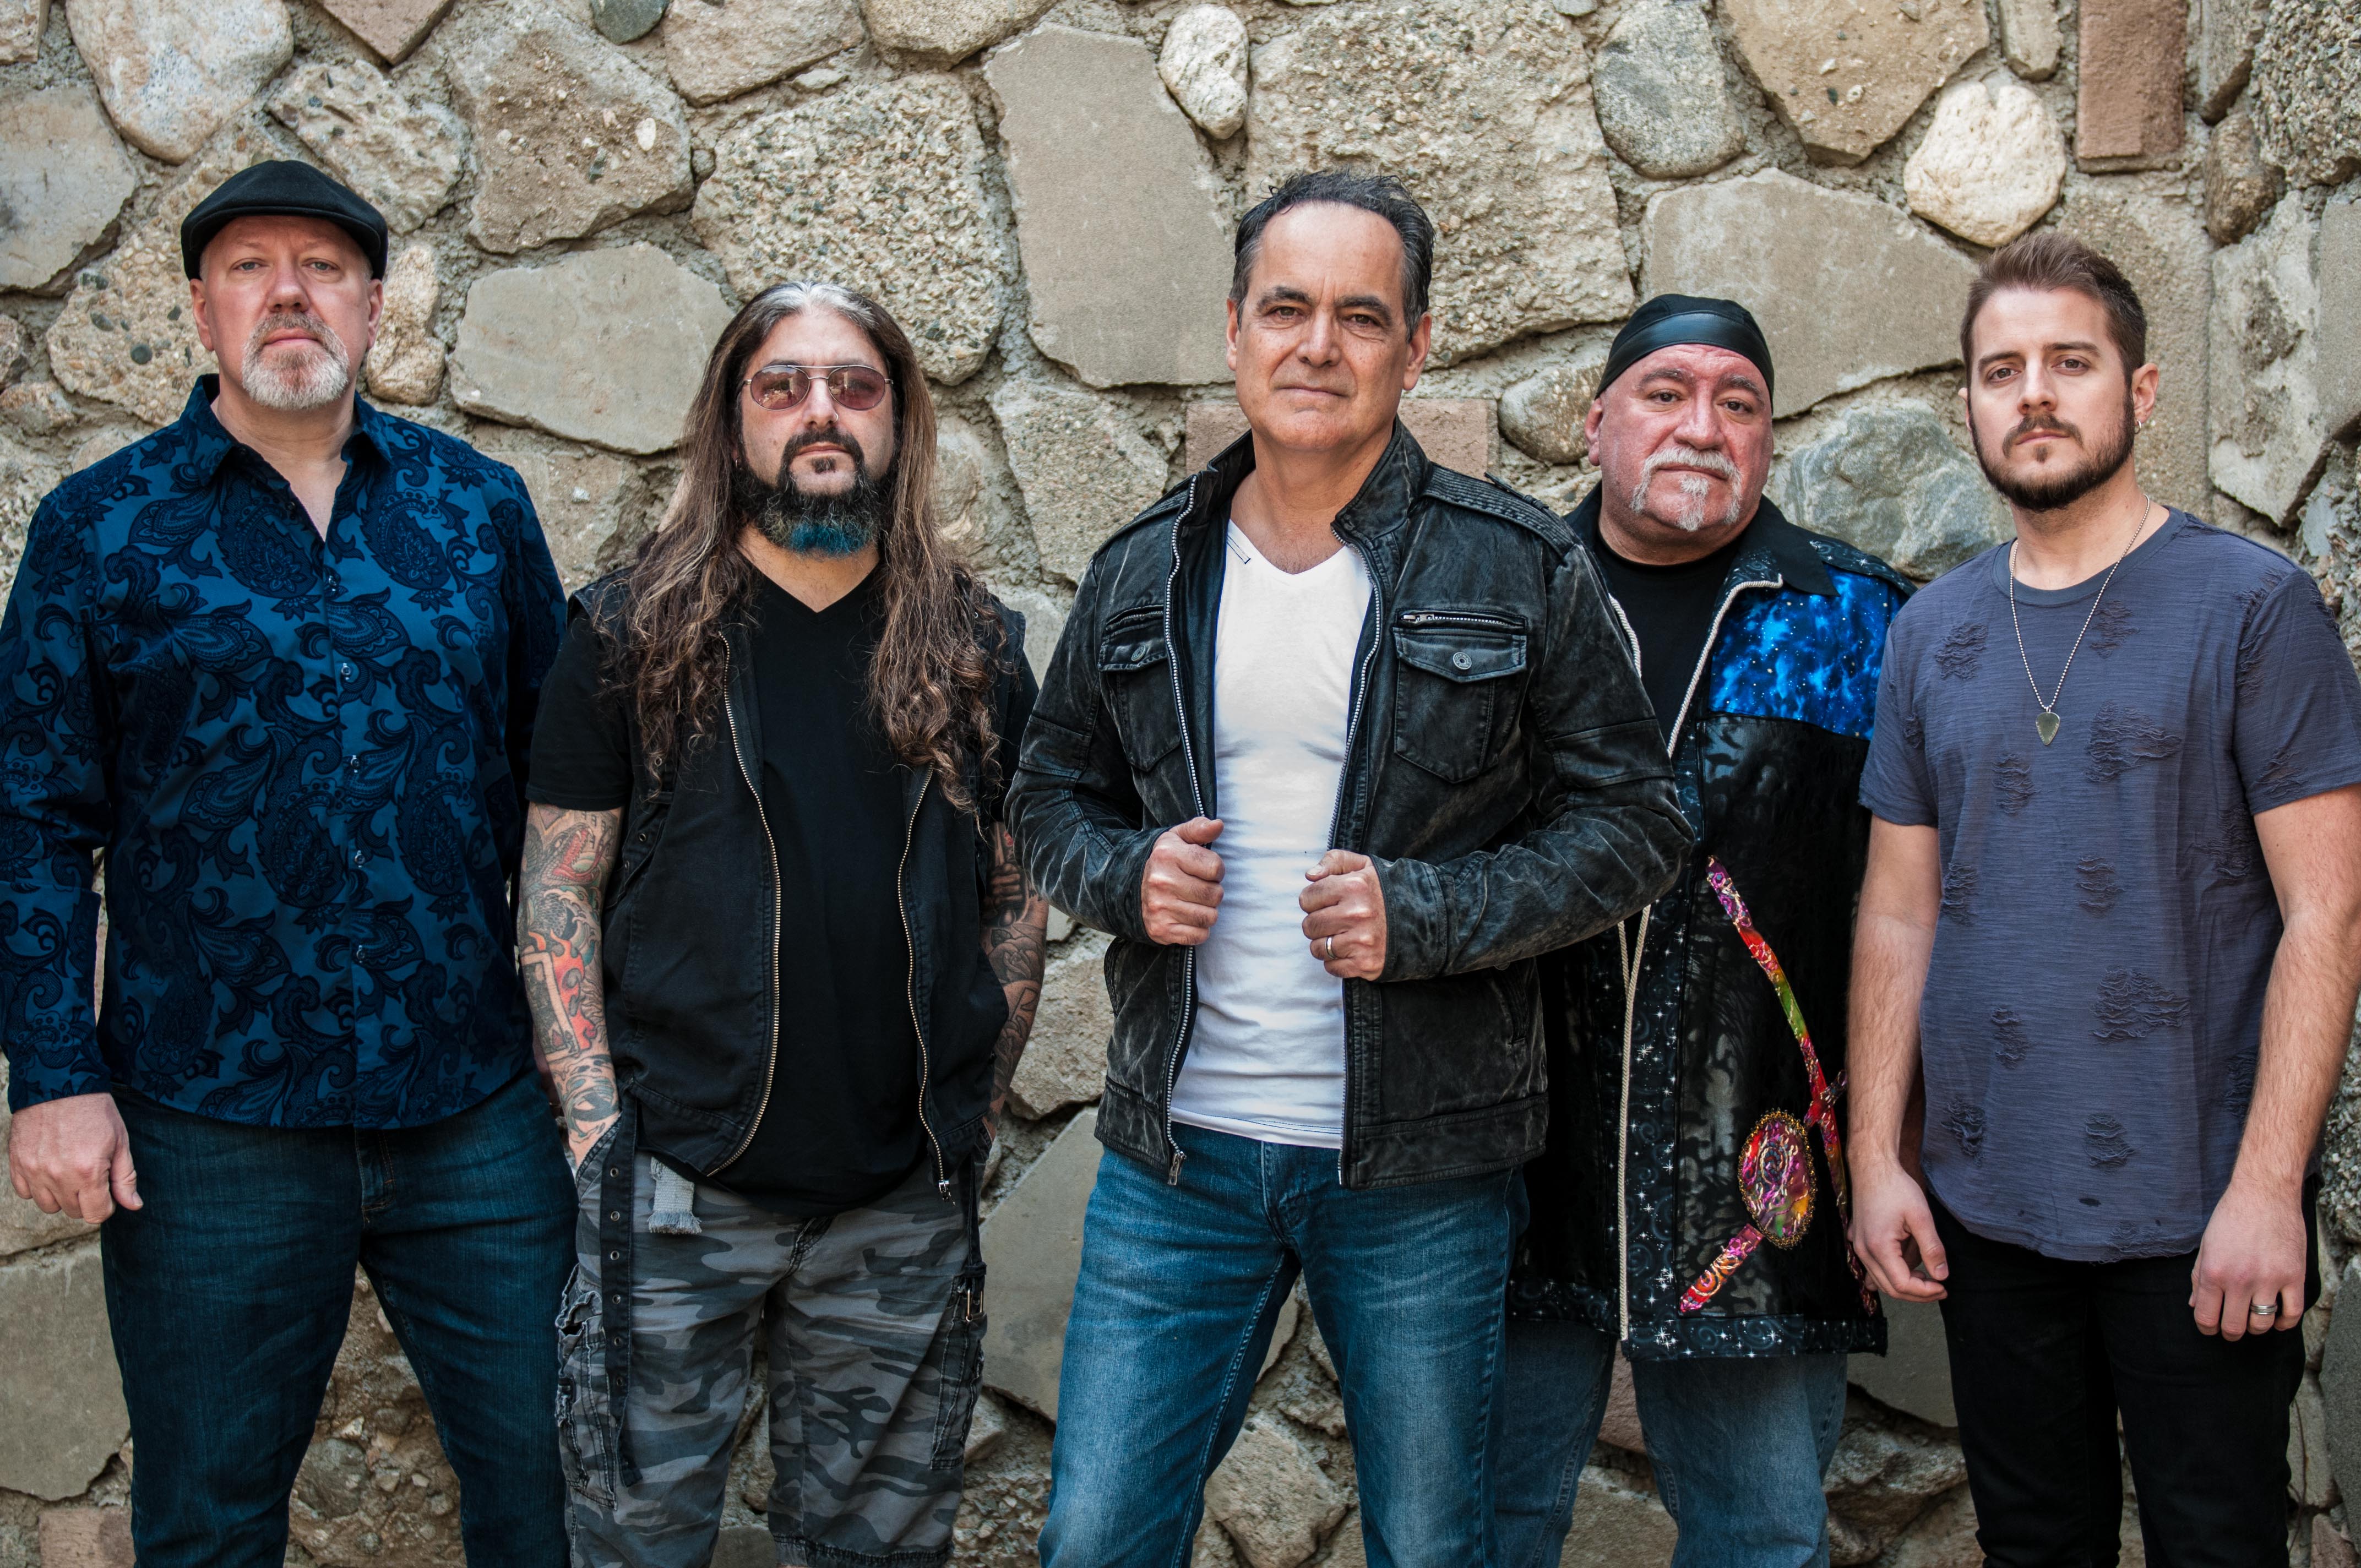 The Neal Morse Band Tour in Support of “The Great Adventure” The Pure Rock Shop Hard Rock